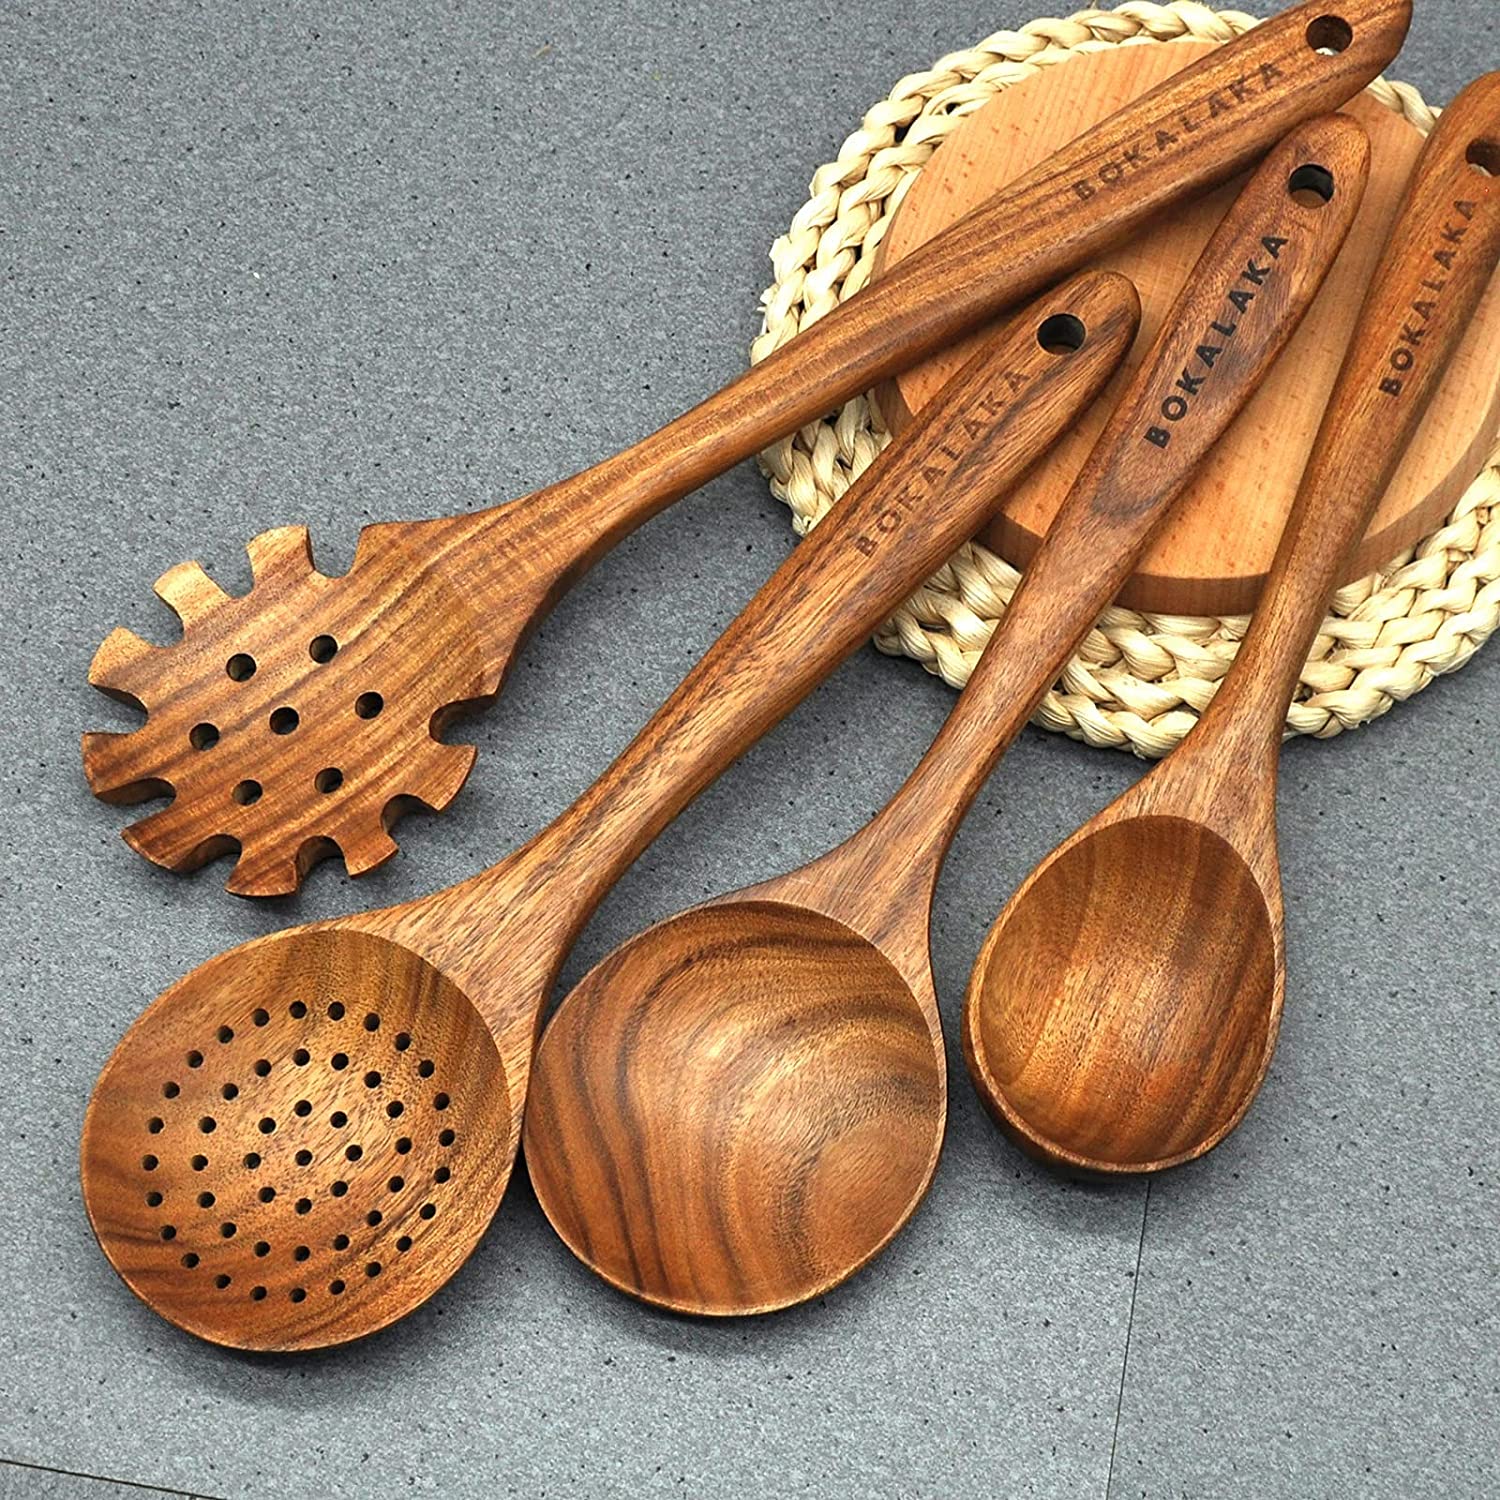 Wooden Utensils for Cooking,12 Pcs Wooden Spoons for Cooking,Teak